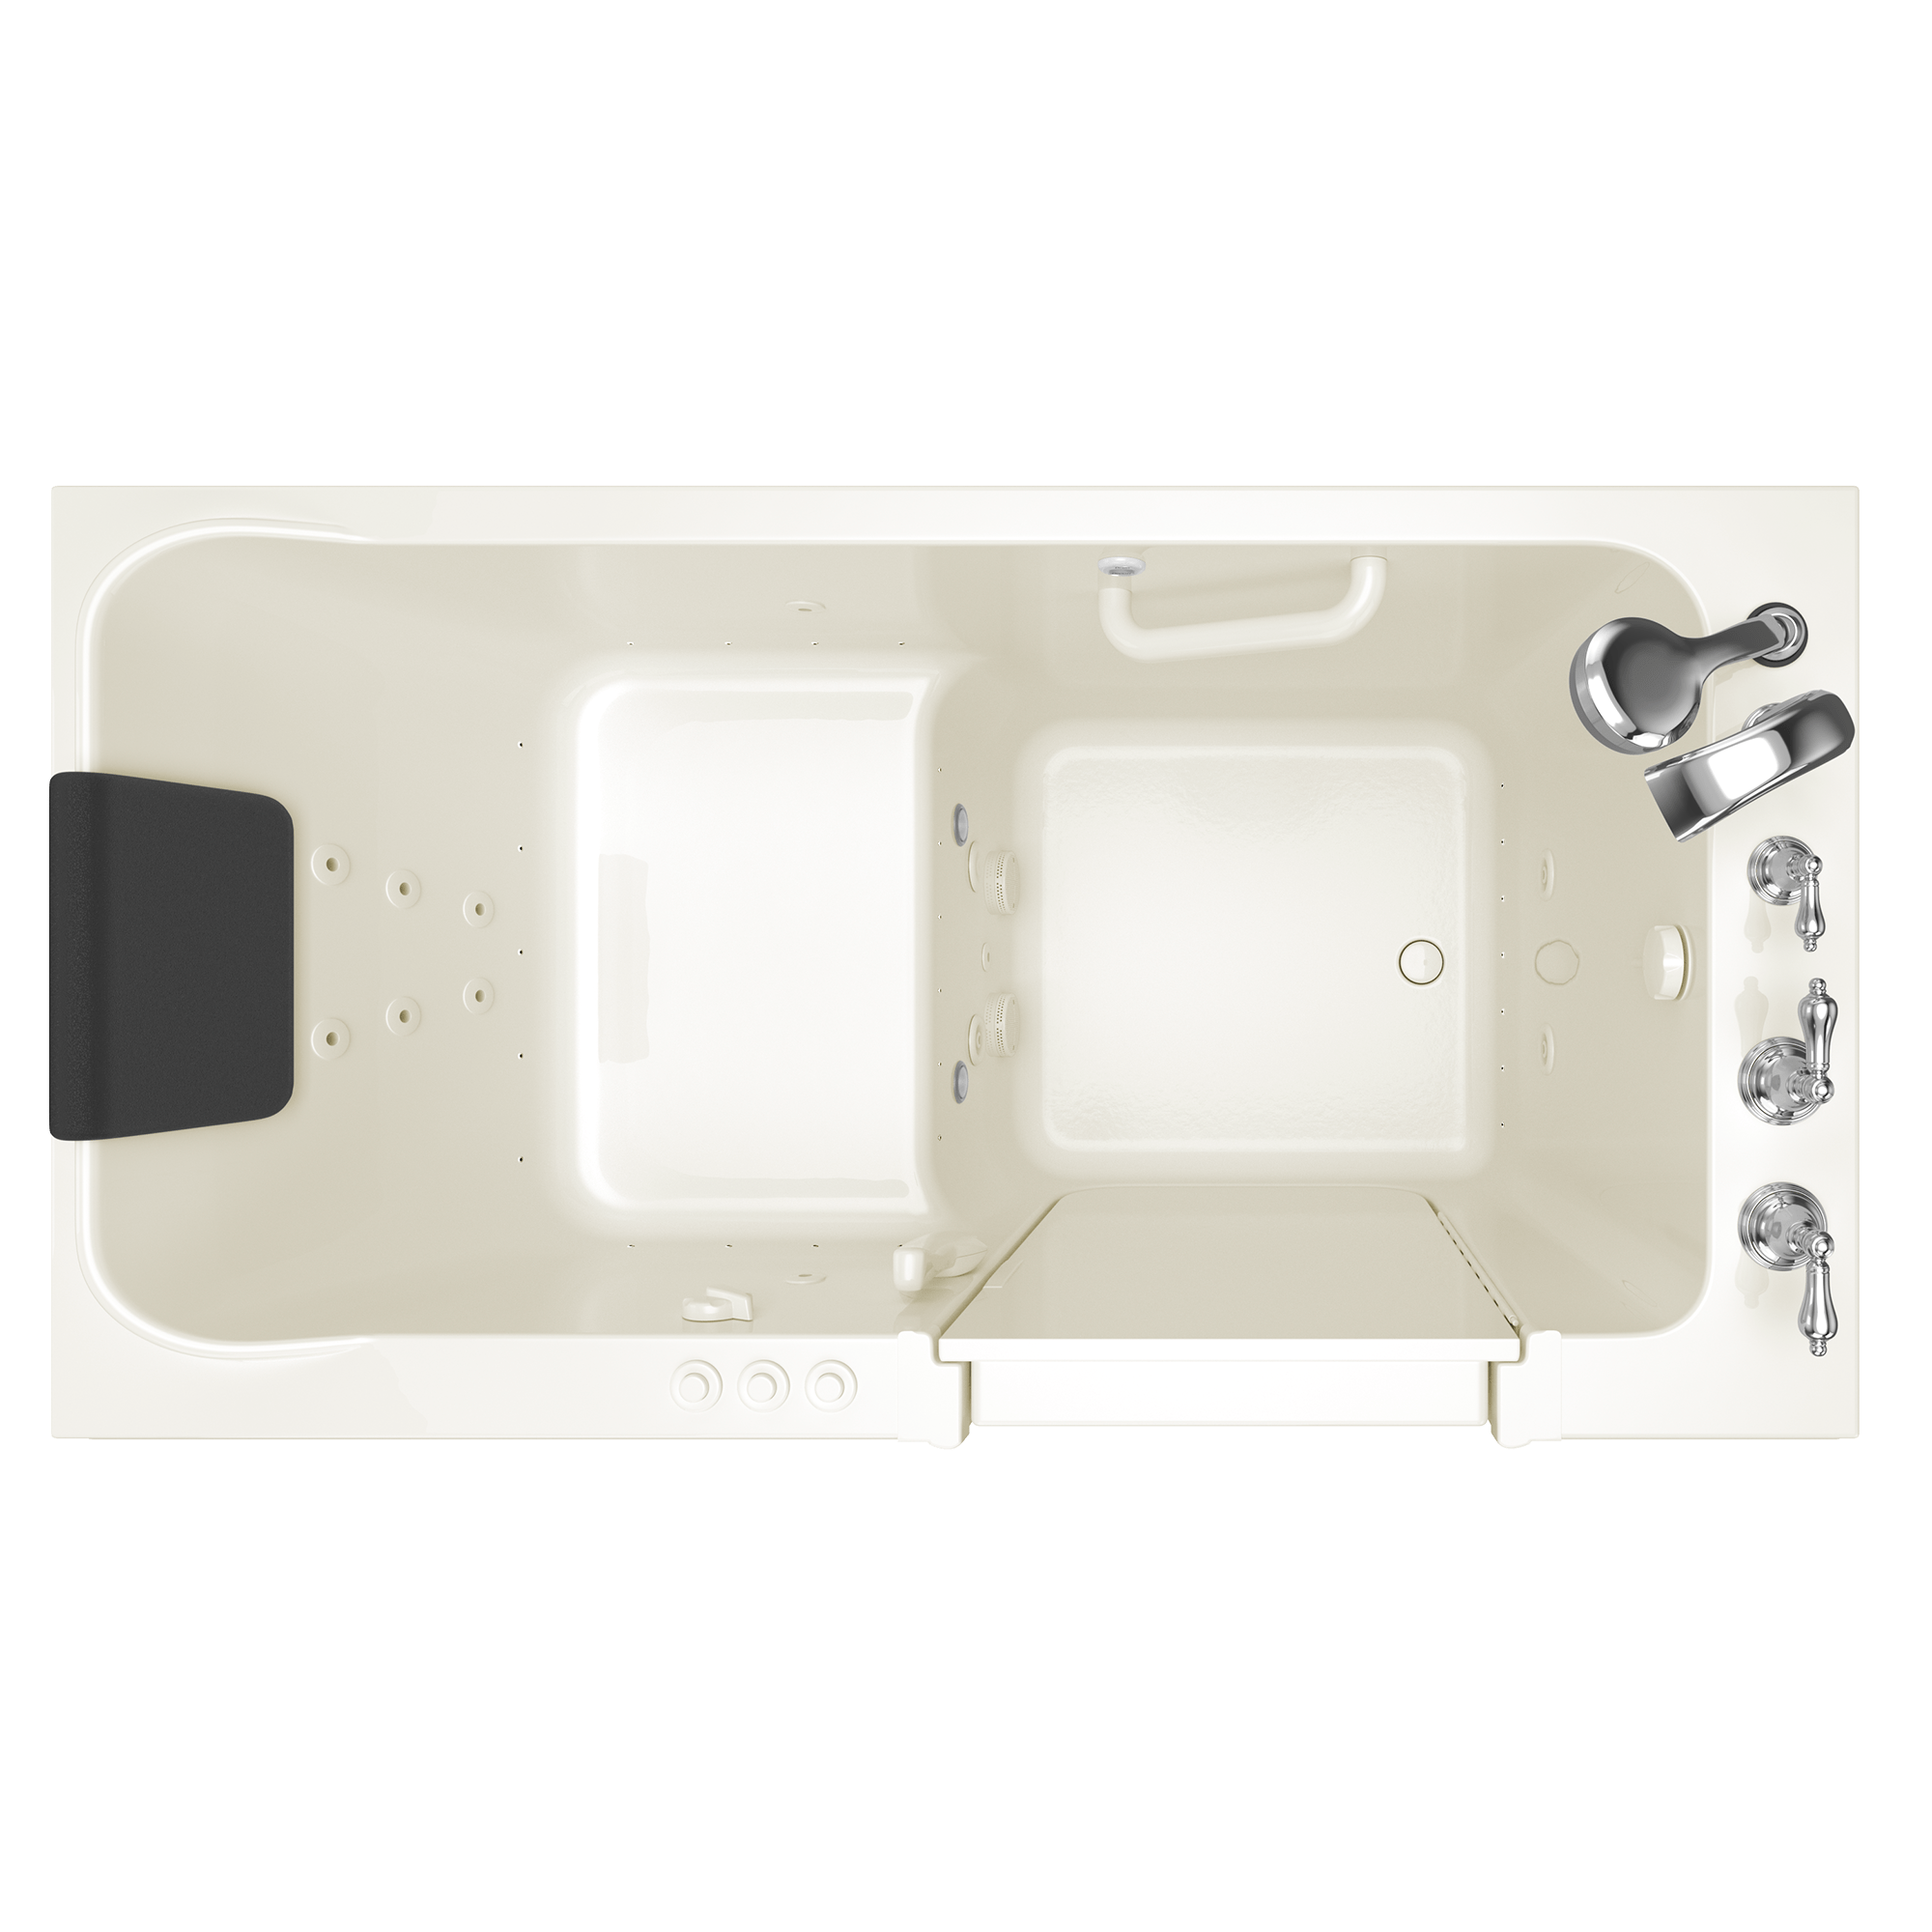 Acrylic Luxury Series 32 x 60 -Inch Walk-in Tub With Combination Air Spa and Whirlpool Systems - Right-Hand Drain With Faucet